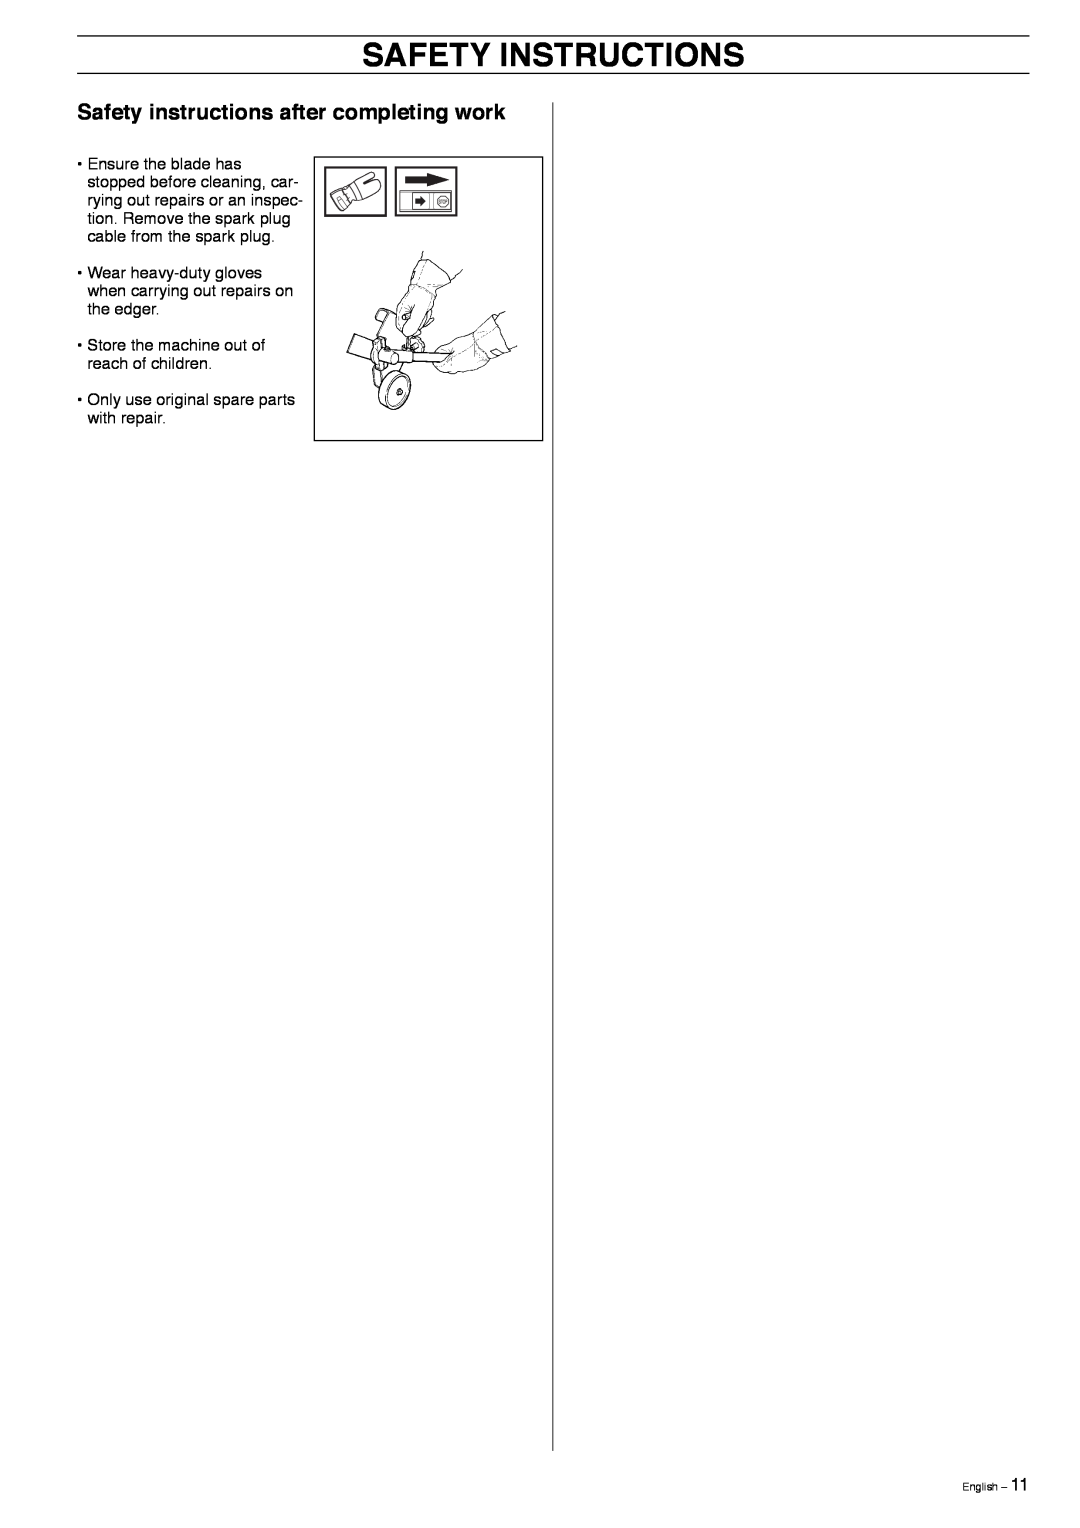 Husqvarna 323E Safety instructions after completing work, Safety Instructions, Store the machine out of reach of children 